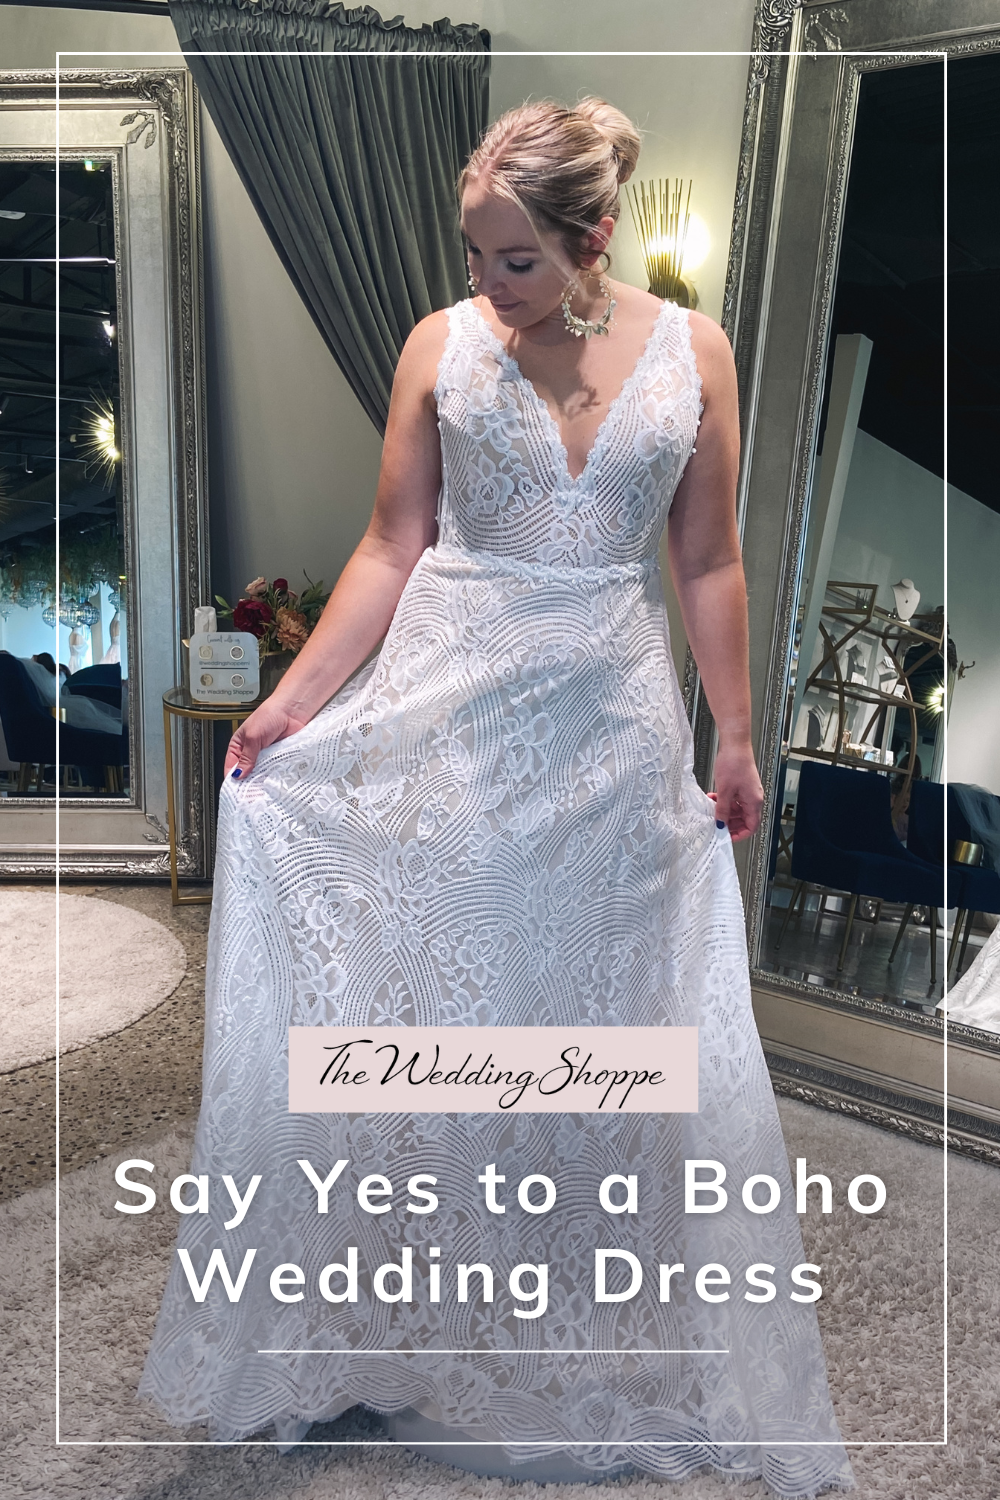 blog post graphic for "Say Yes to a Boho Wedding Dress" from The Wedding Shoppe